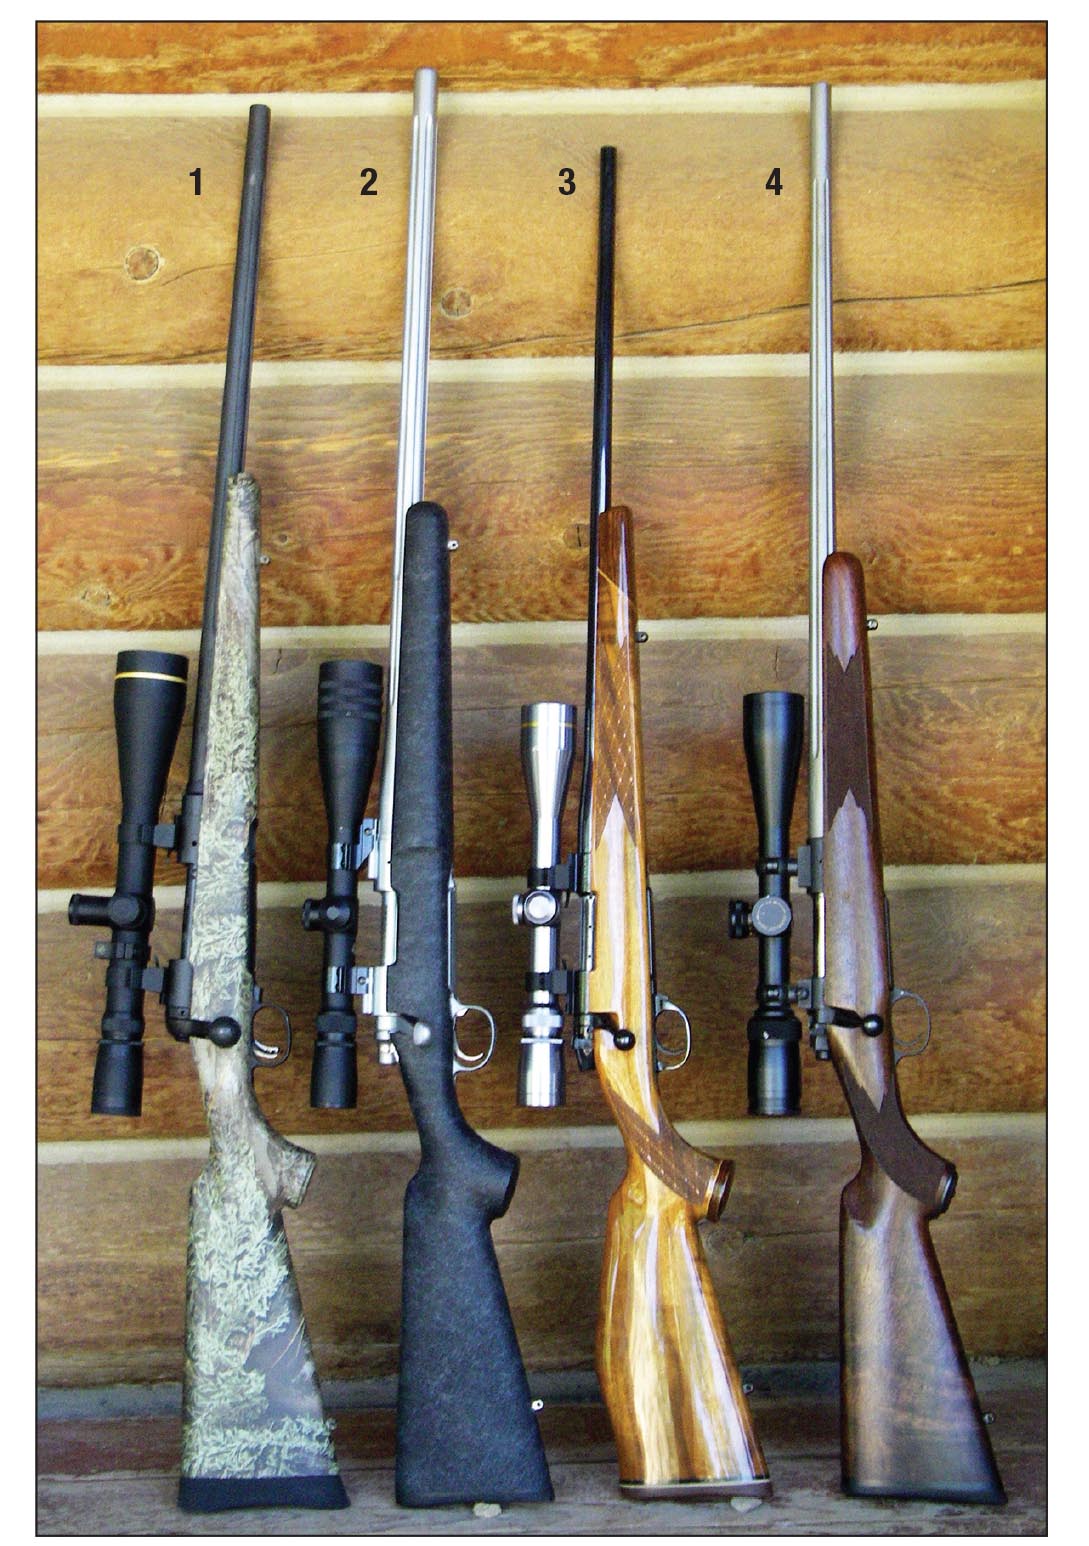 Virtually every major rifle manufacturer offers guns chambered in .22-250 Remington. Examples include: (1) Savage Model 10 Predator Hunter Max 1, (2) Remington Model 700 Varmint Stainless Fluted, (3) Weatherby Mark V Varmintmaster and  (4) Kimber 84M.